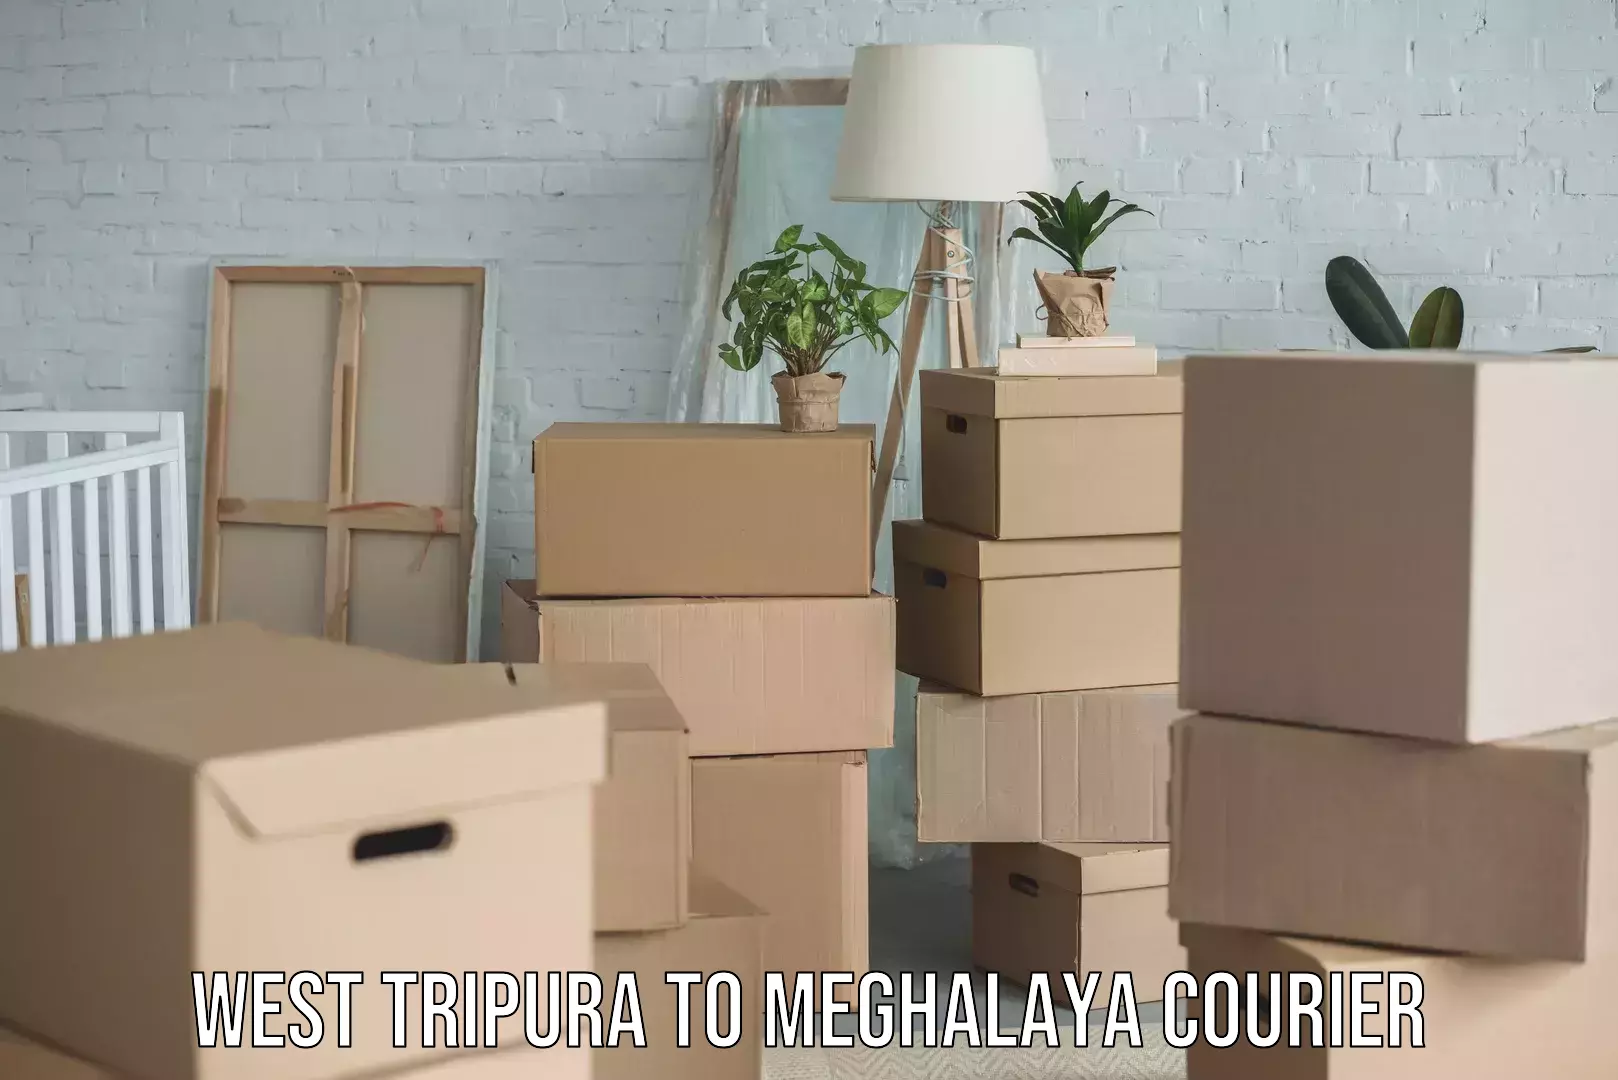 Professional parcel services West Tripura to Meghalaya